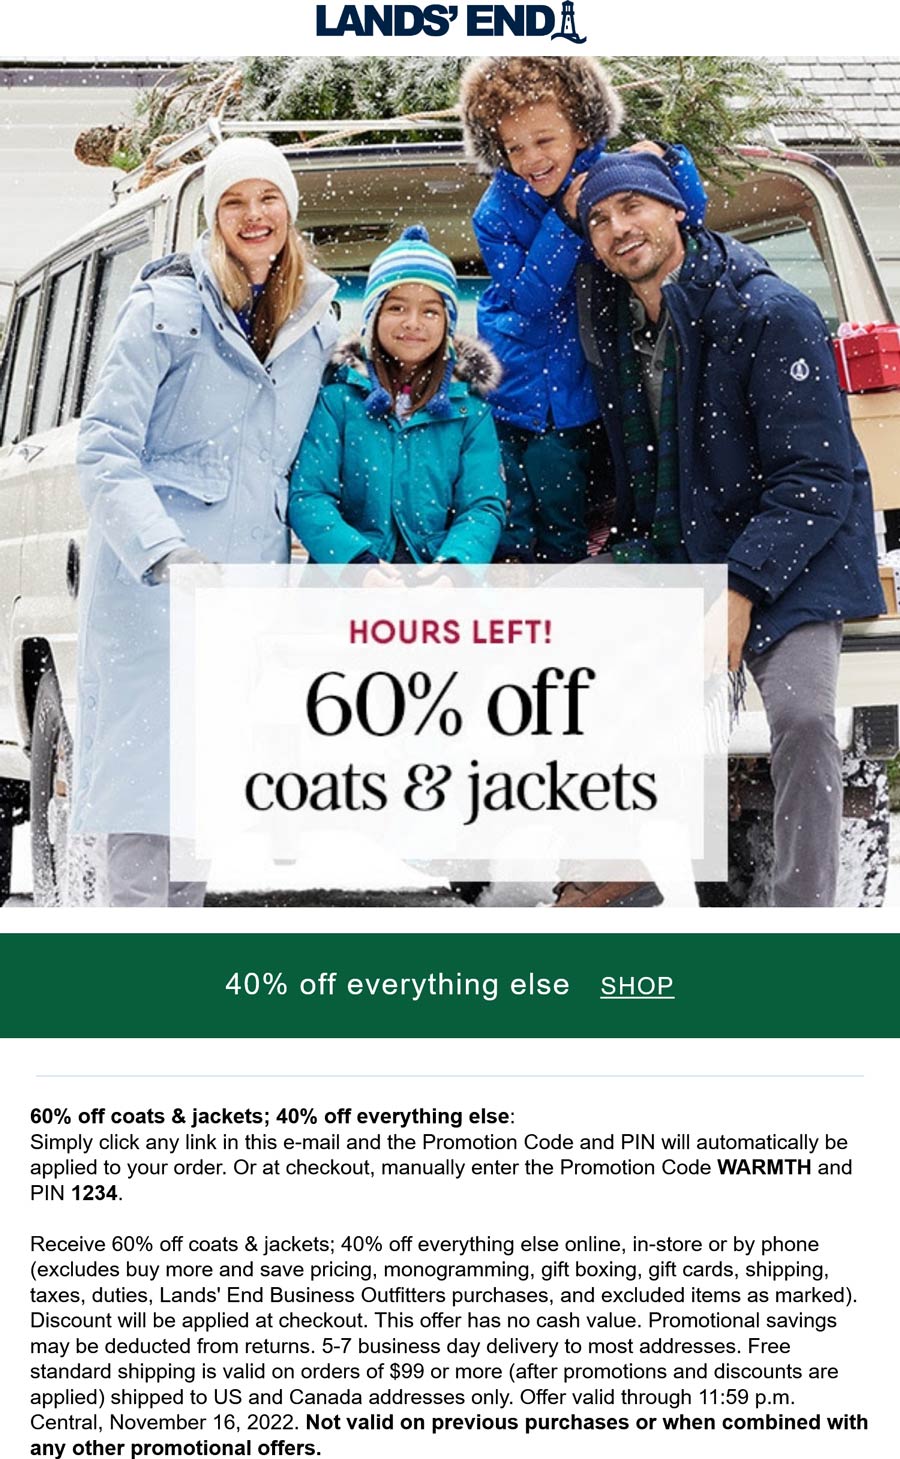 Lands End stores Coupon  40% off everything & more today at Lands End via promo code WARMTH and pin 1234 #landsend 